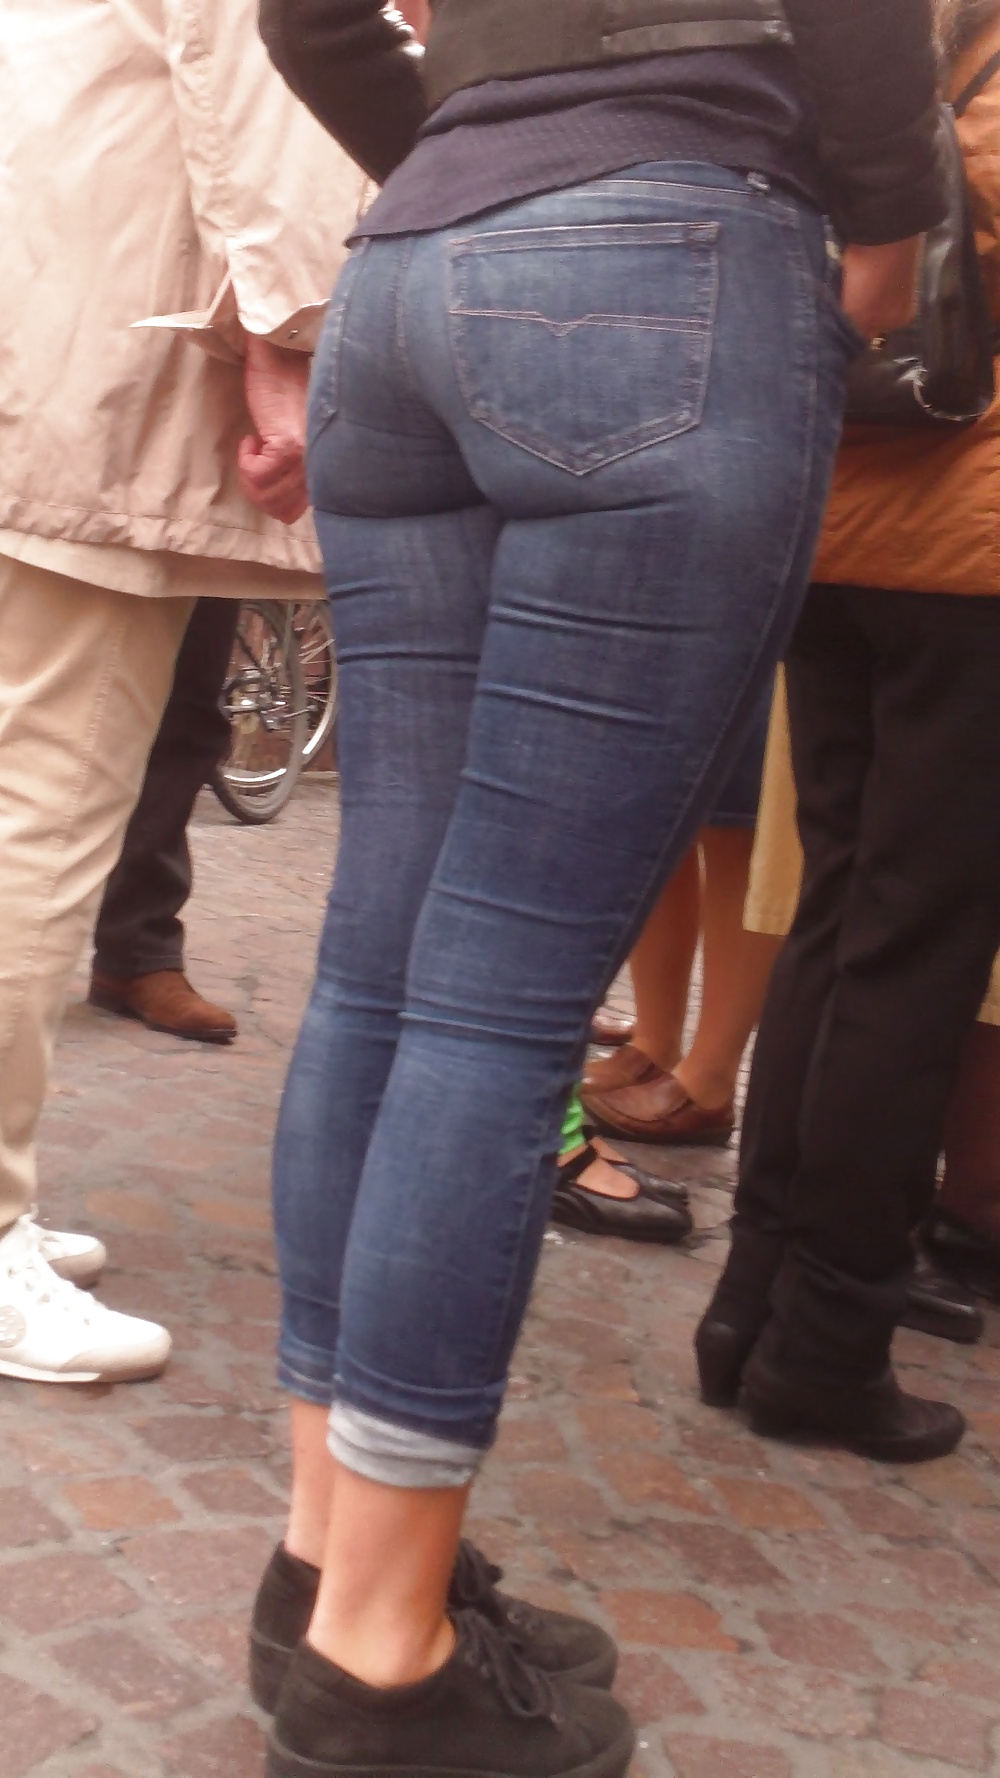 Nice big juicy teen ass & butt in very tight blue jeans  #31832255